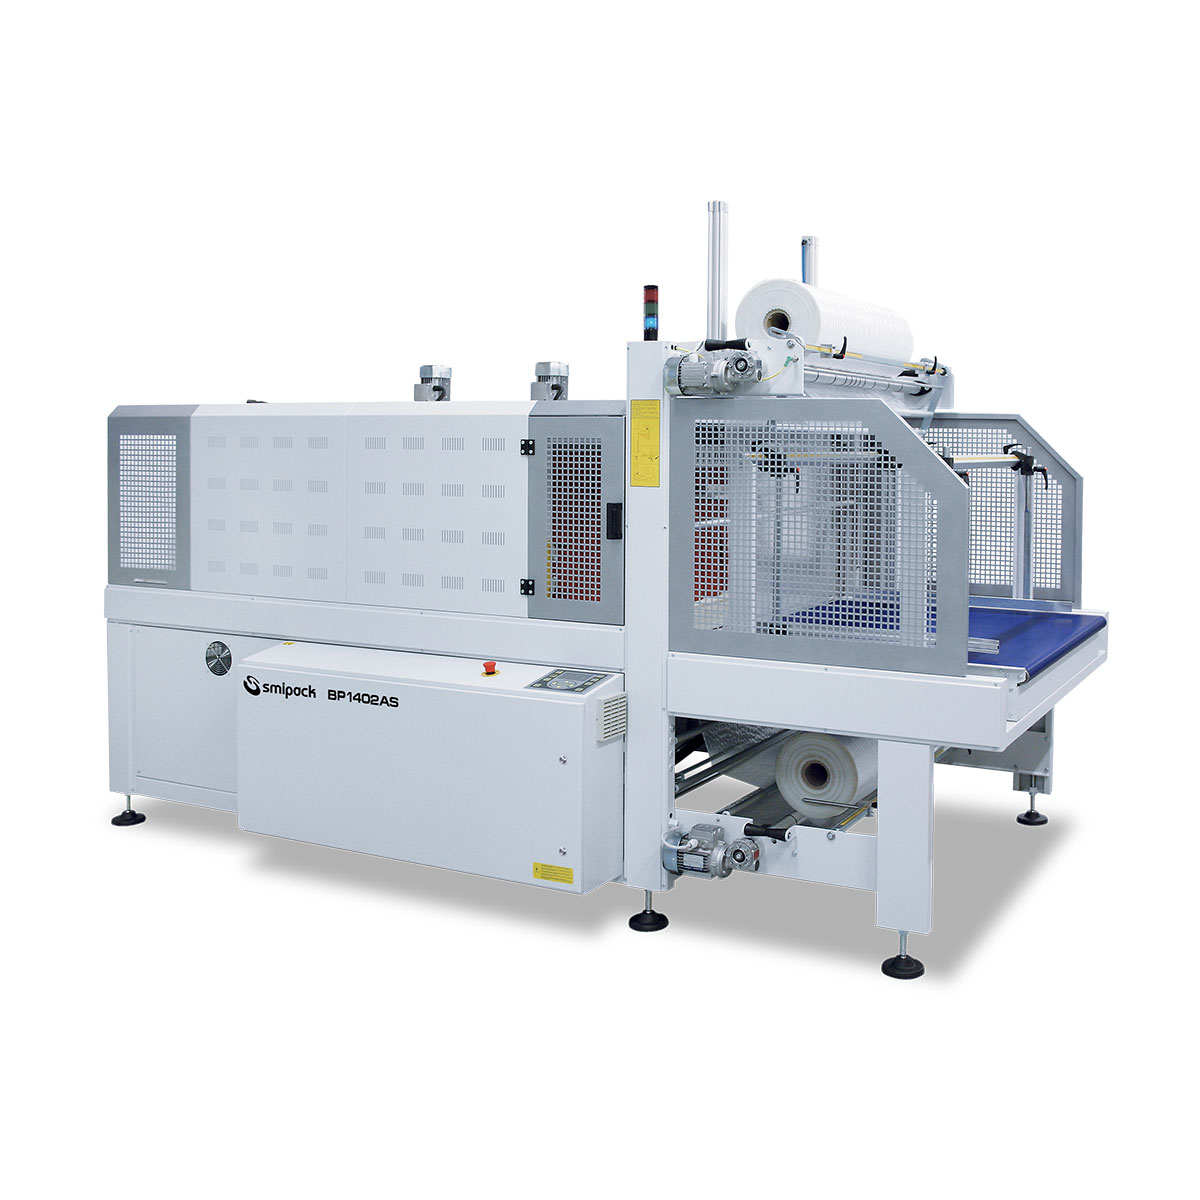 Bundle Wrapper - In Line Wrapping Machine